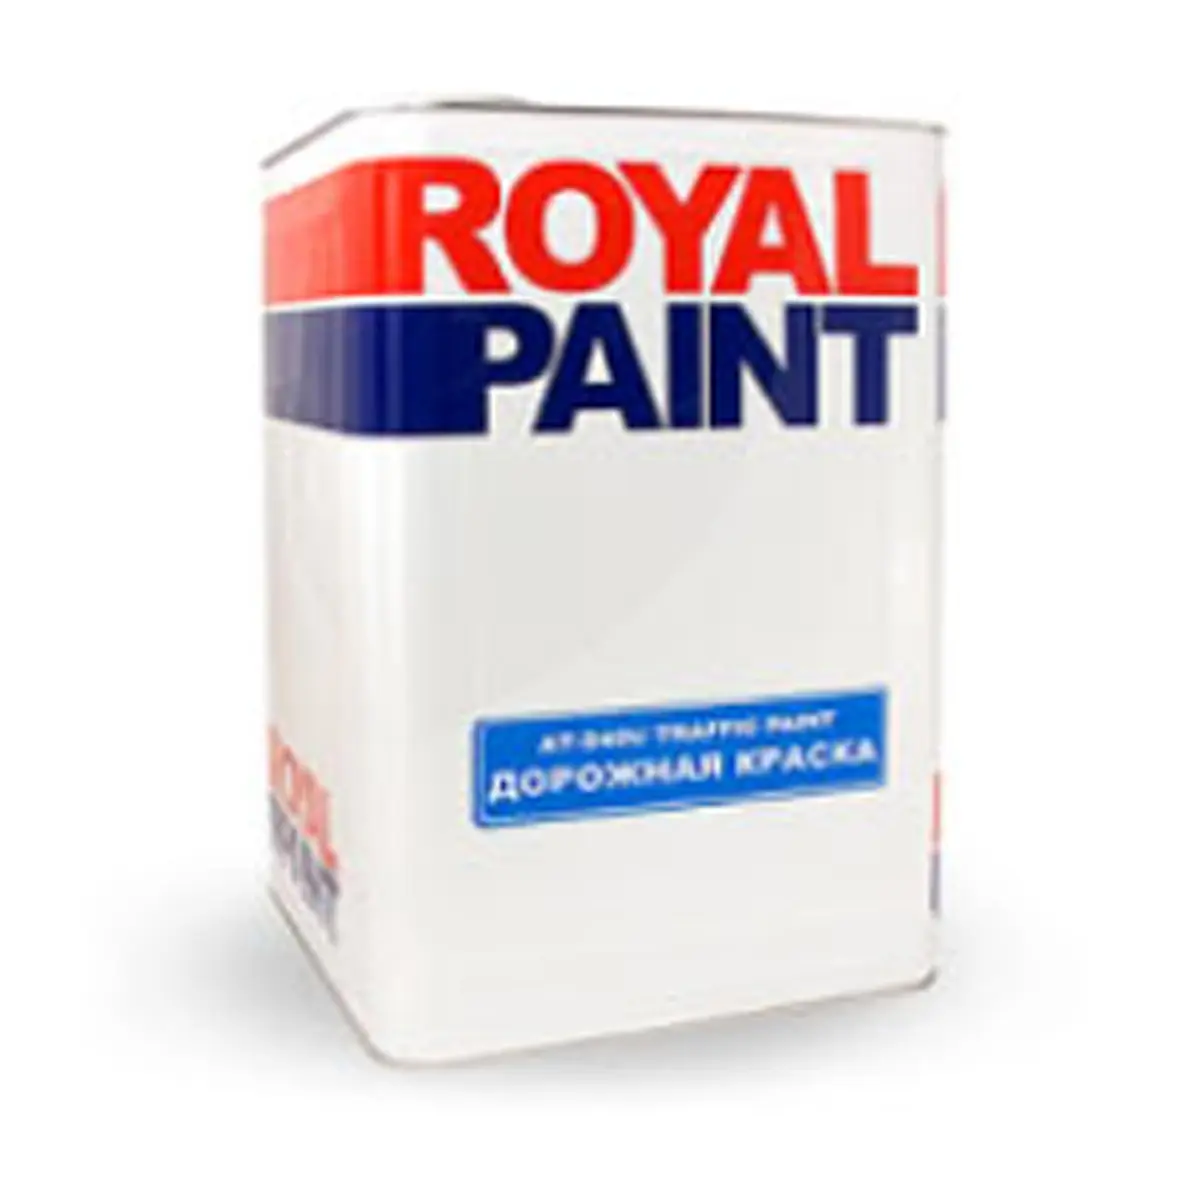 Top quality TRAFFIC PAINT easy application guarantee of quality goods